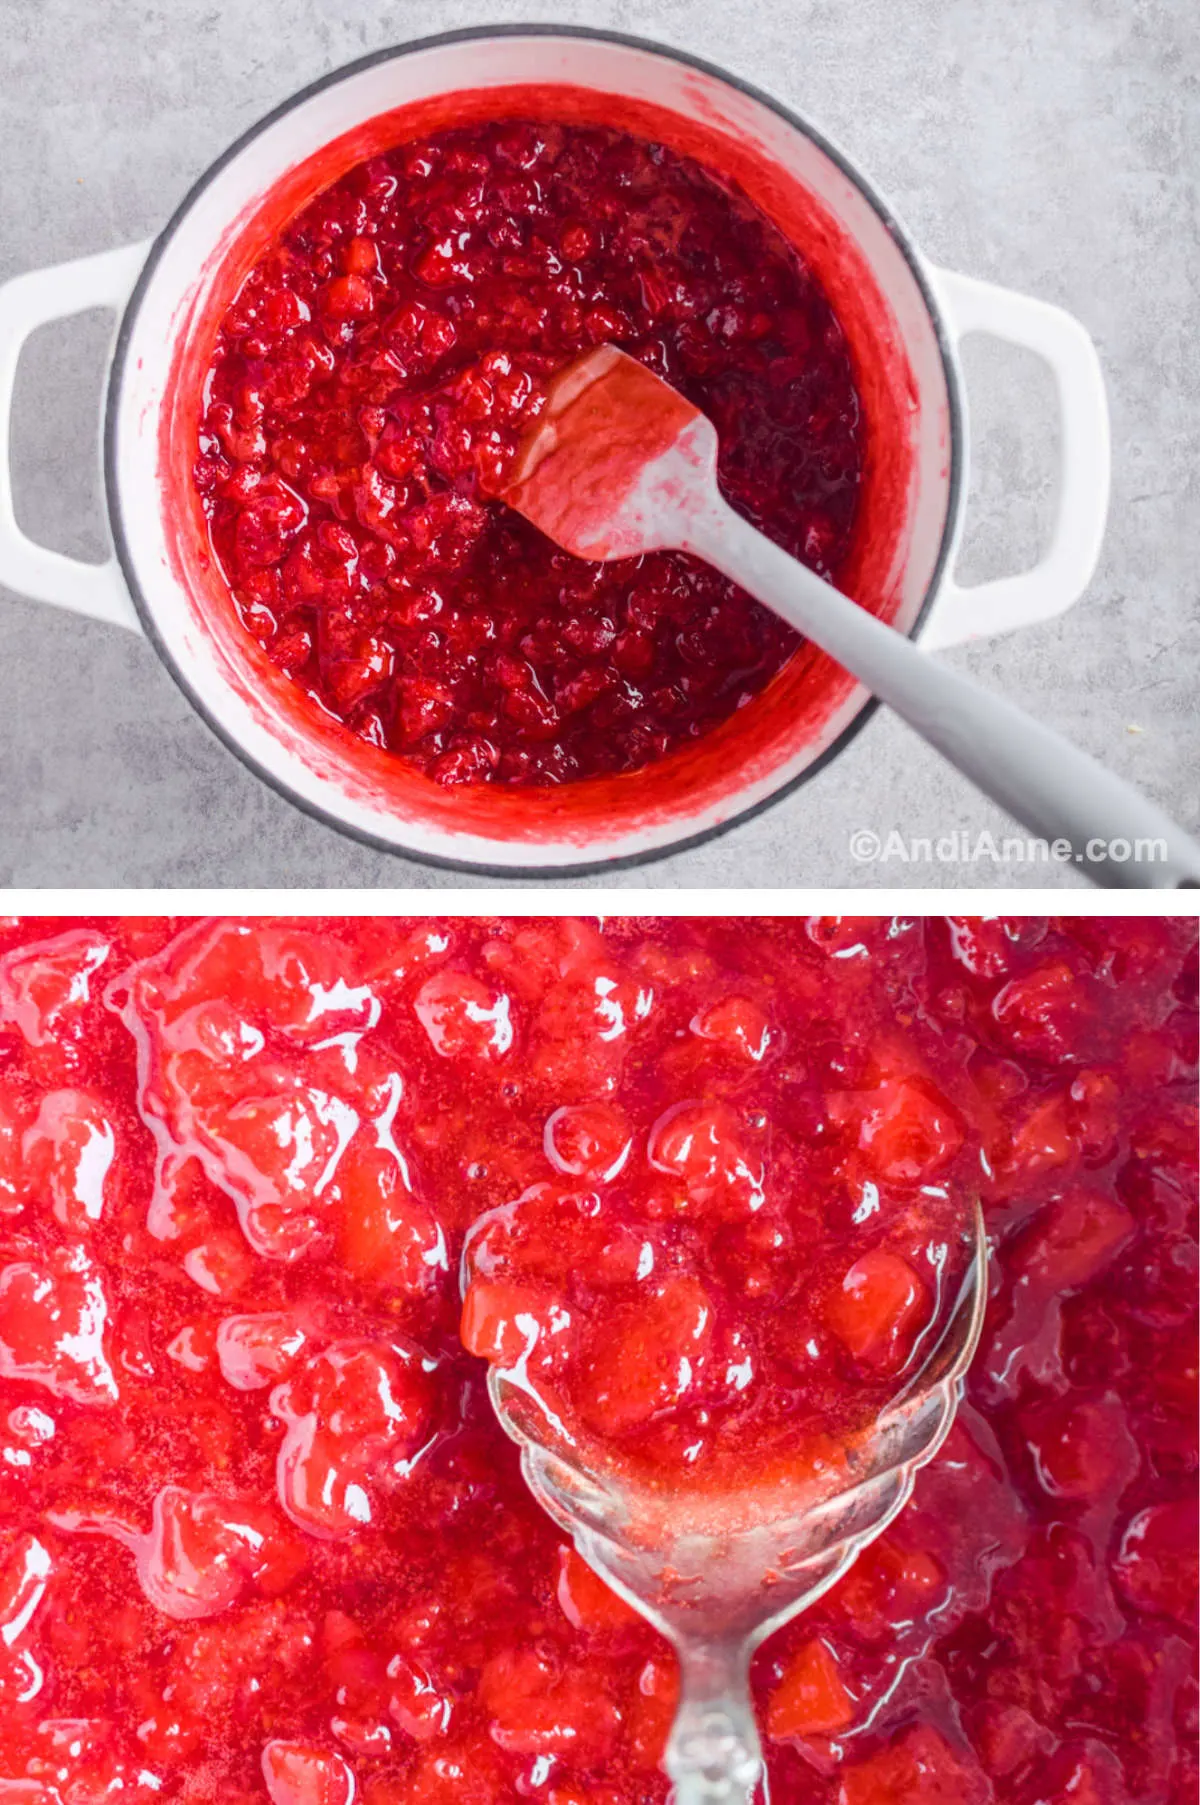 Two overhead images in one: 1. Strawberries in pot removed from. heat. 2. Closeup of finished sauce in a spoon. 